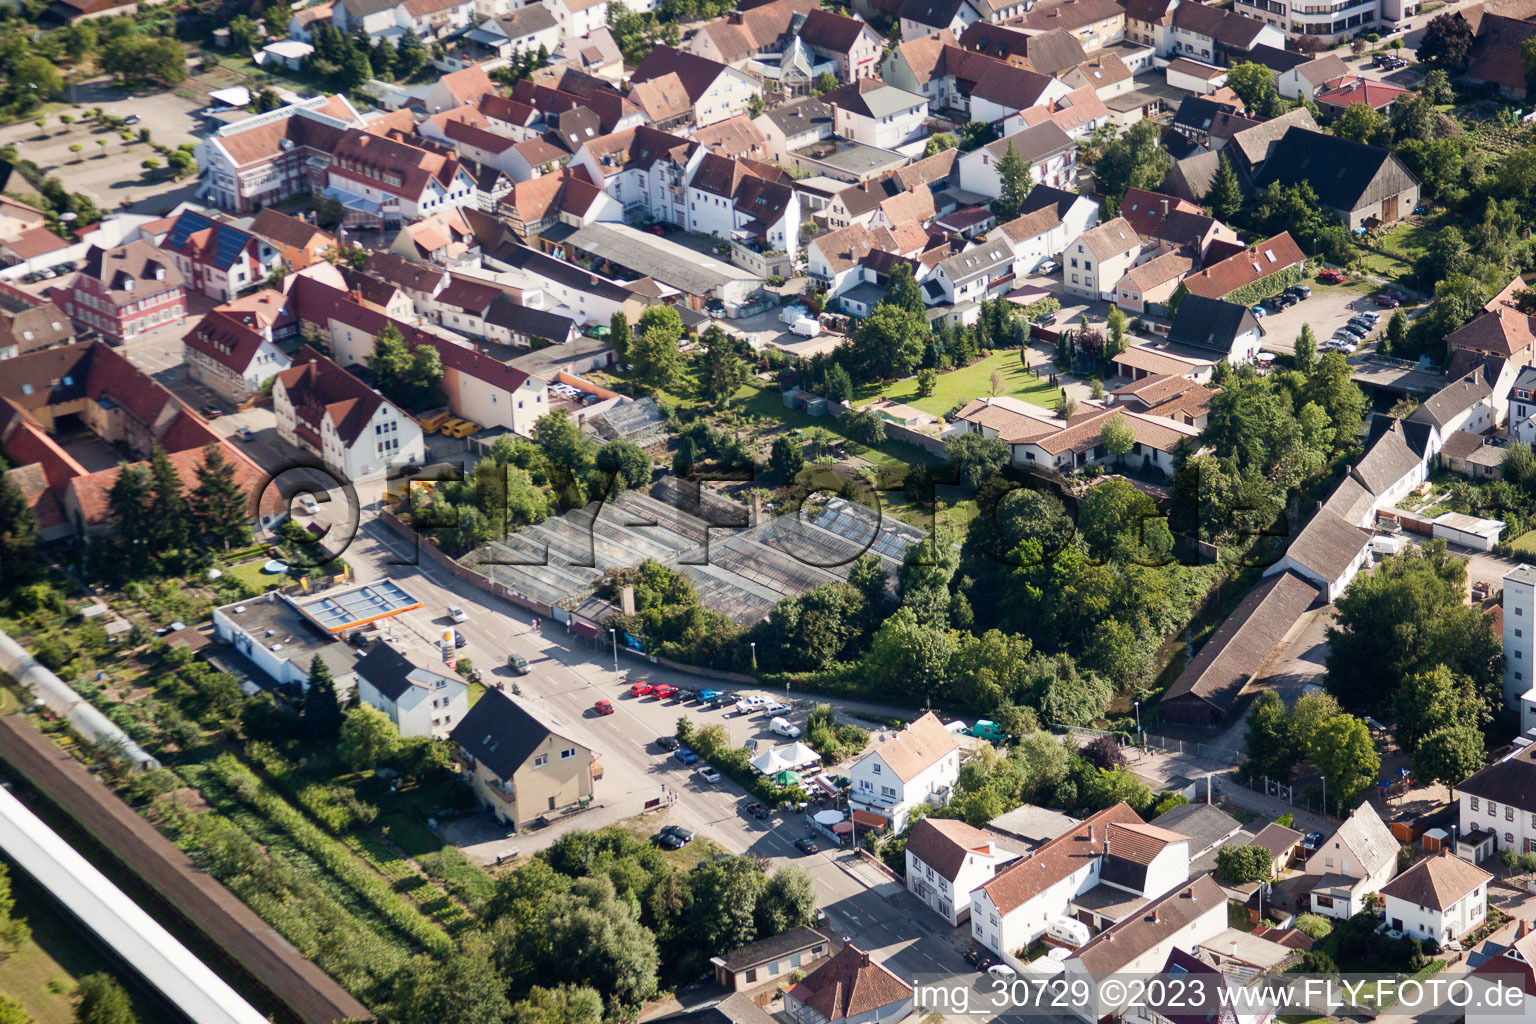 Rülzheim in the state Rhineland-Palatinate, Germany seen from a drone